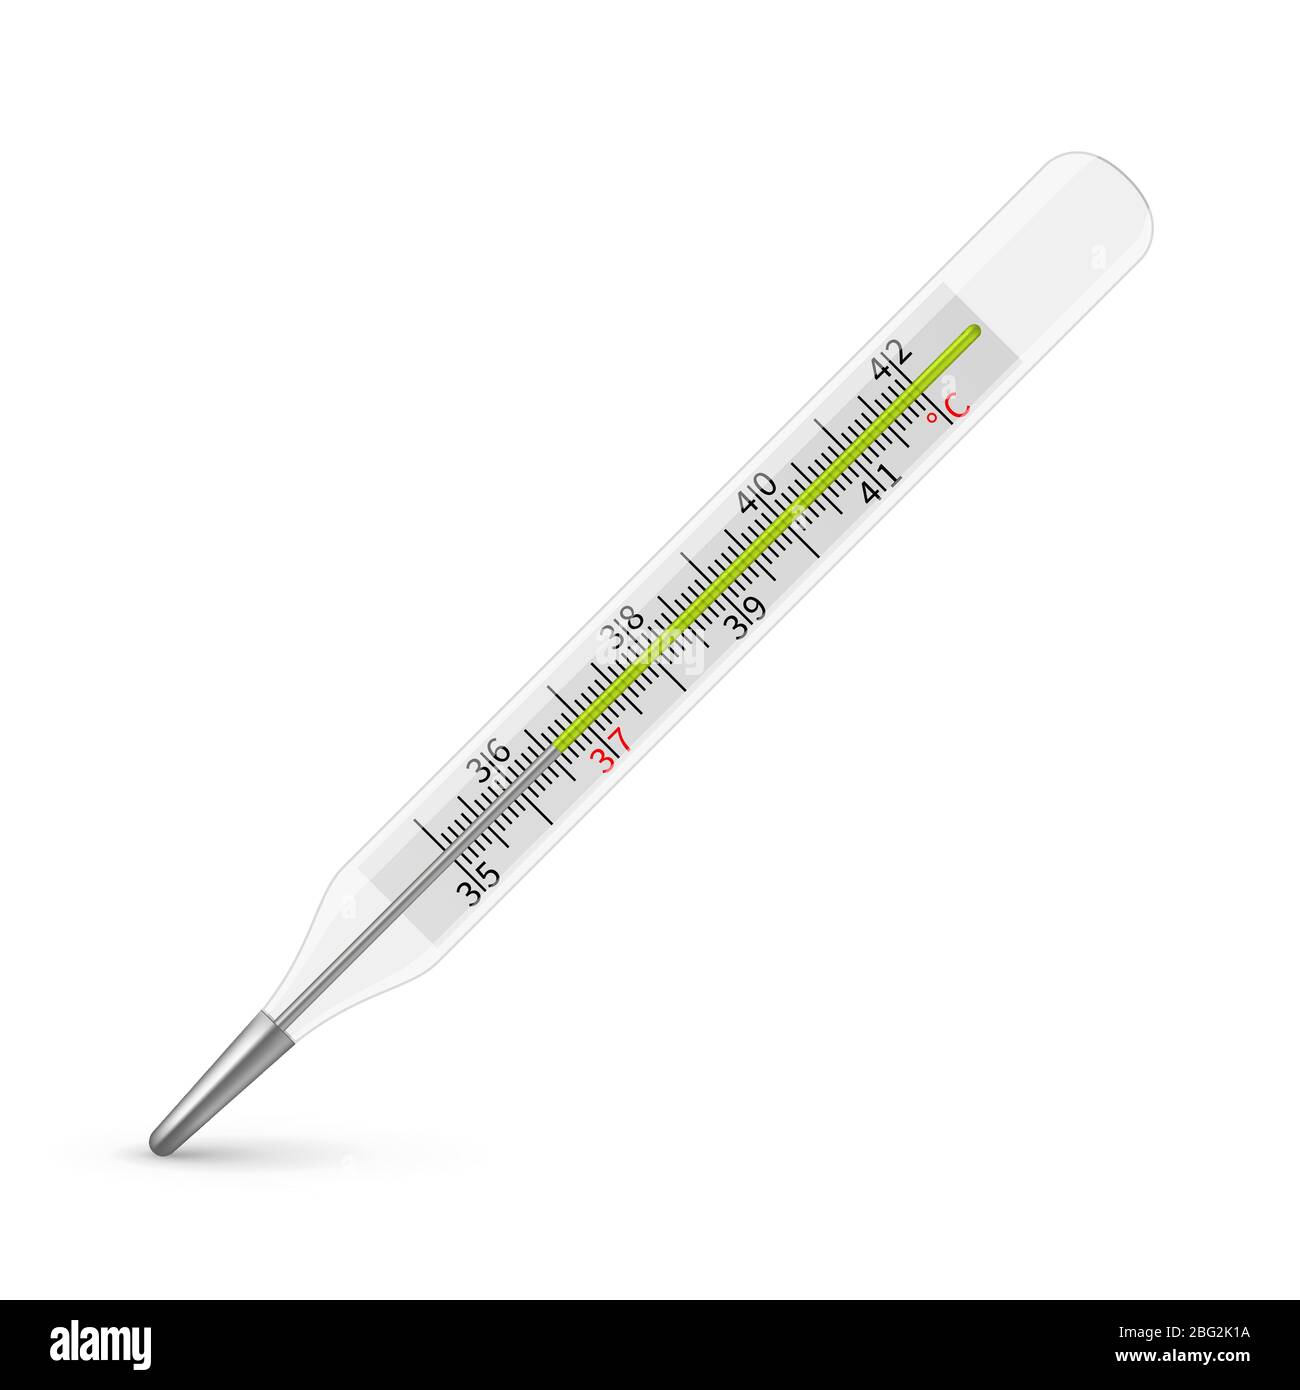 https://c8.alamy.com/comp/2BG2K1A/medical-mercury-thermometer-diagnostic-temperature-instrument-for-human-body-vector-illustration-thermometer-equipment-mercury-temperature-measurem-2BG2K1A.jpg